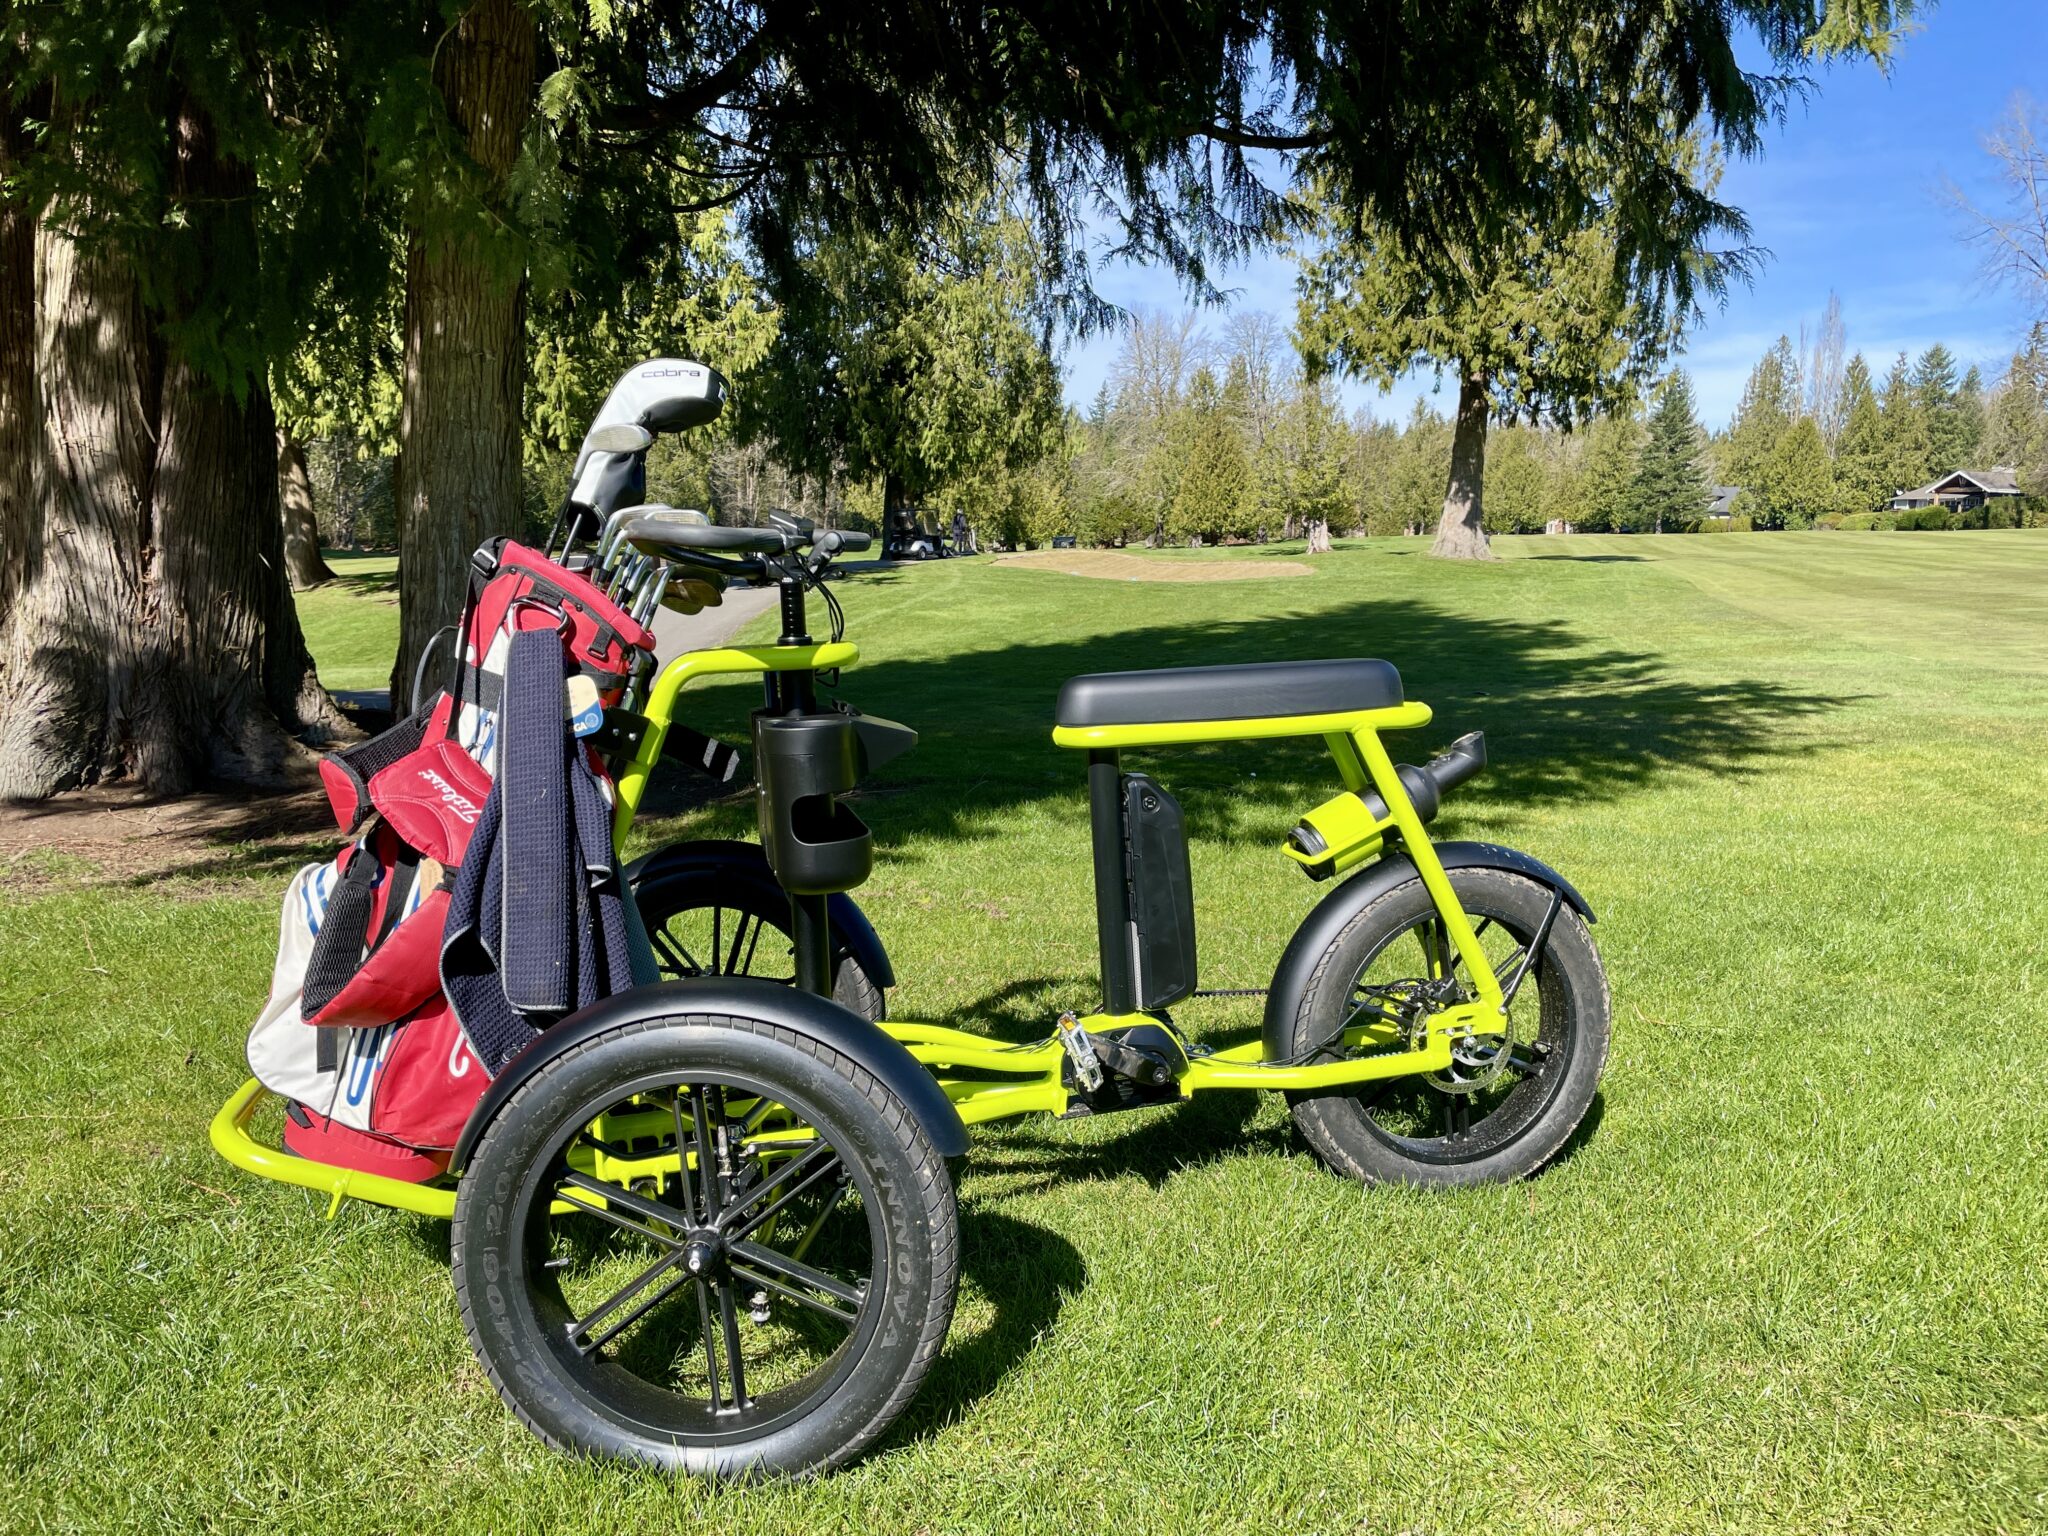 microsoft, riding bikes and making birdies: we played golf with an electric 3-wheeler built by a seattle startup